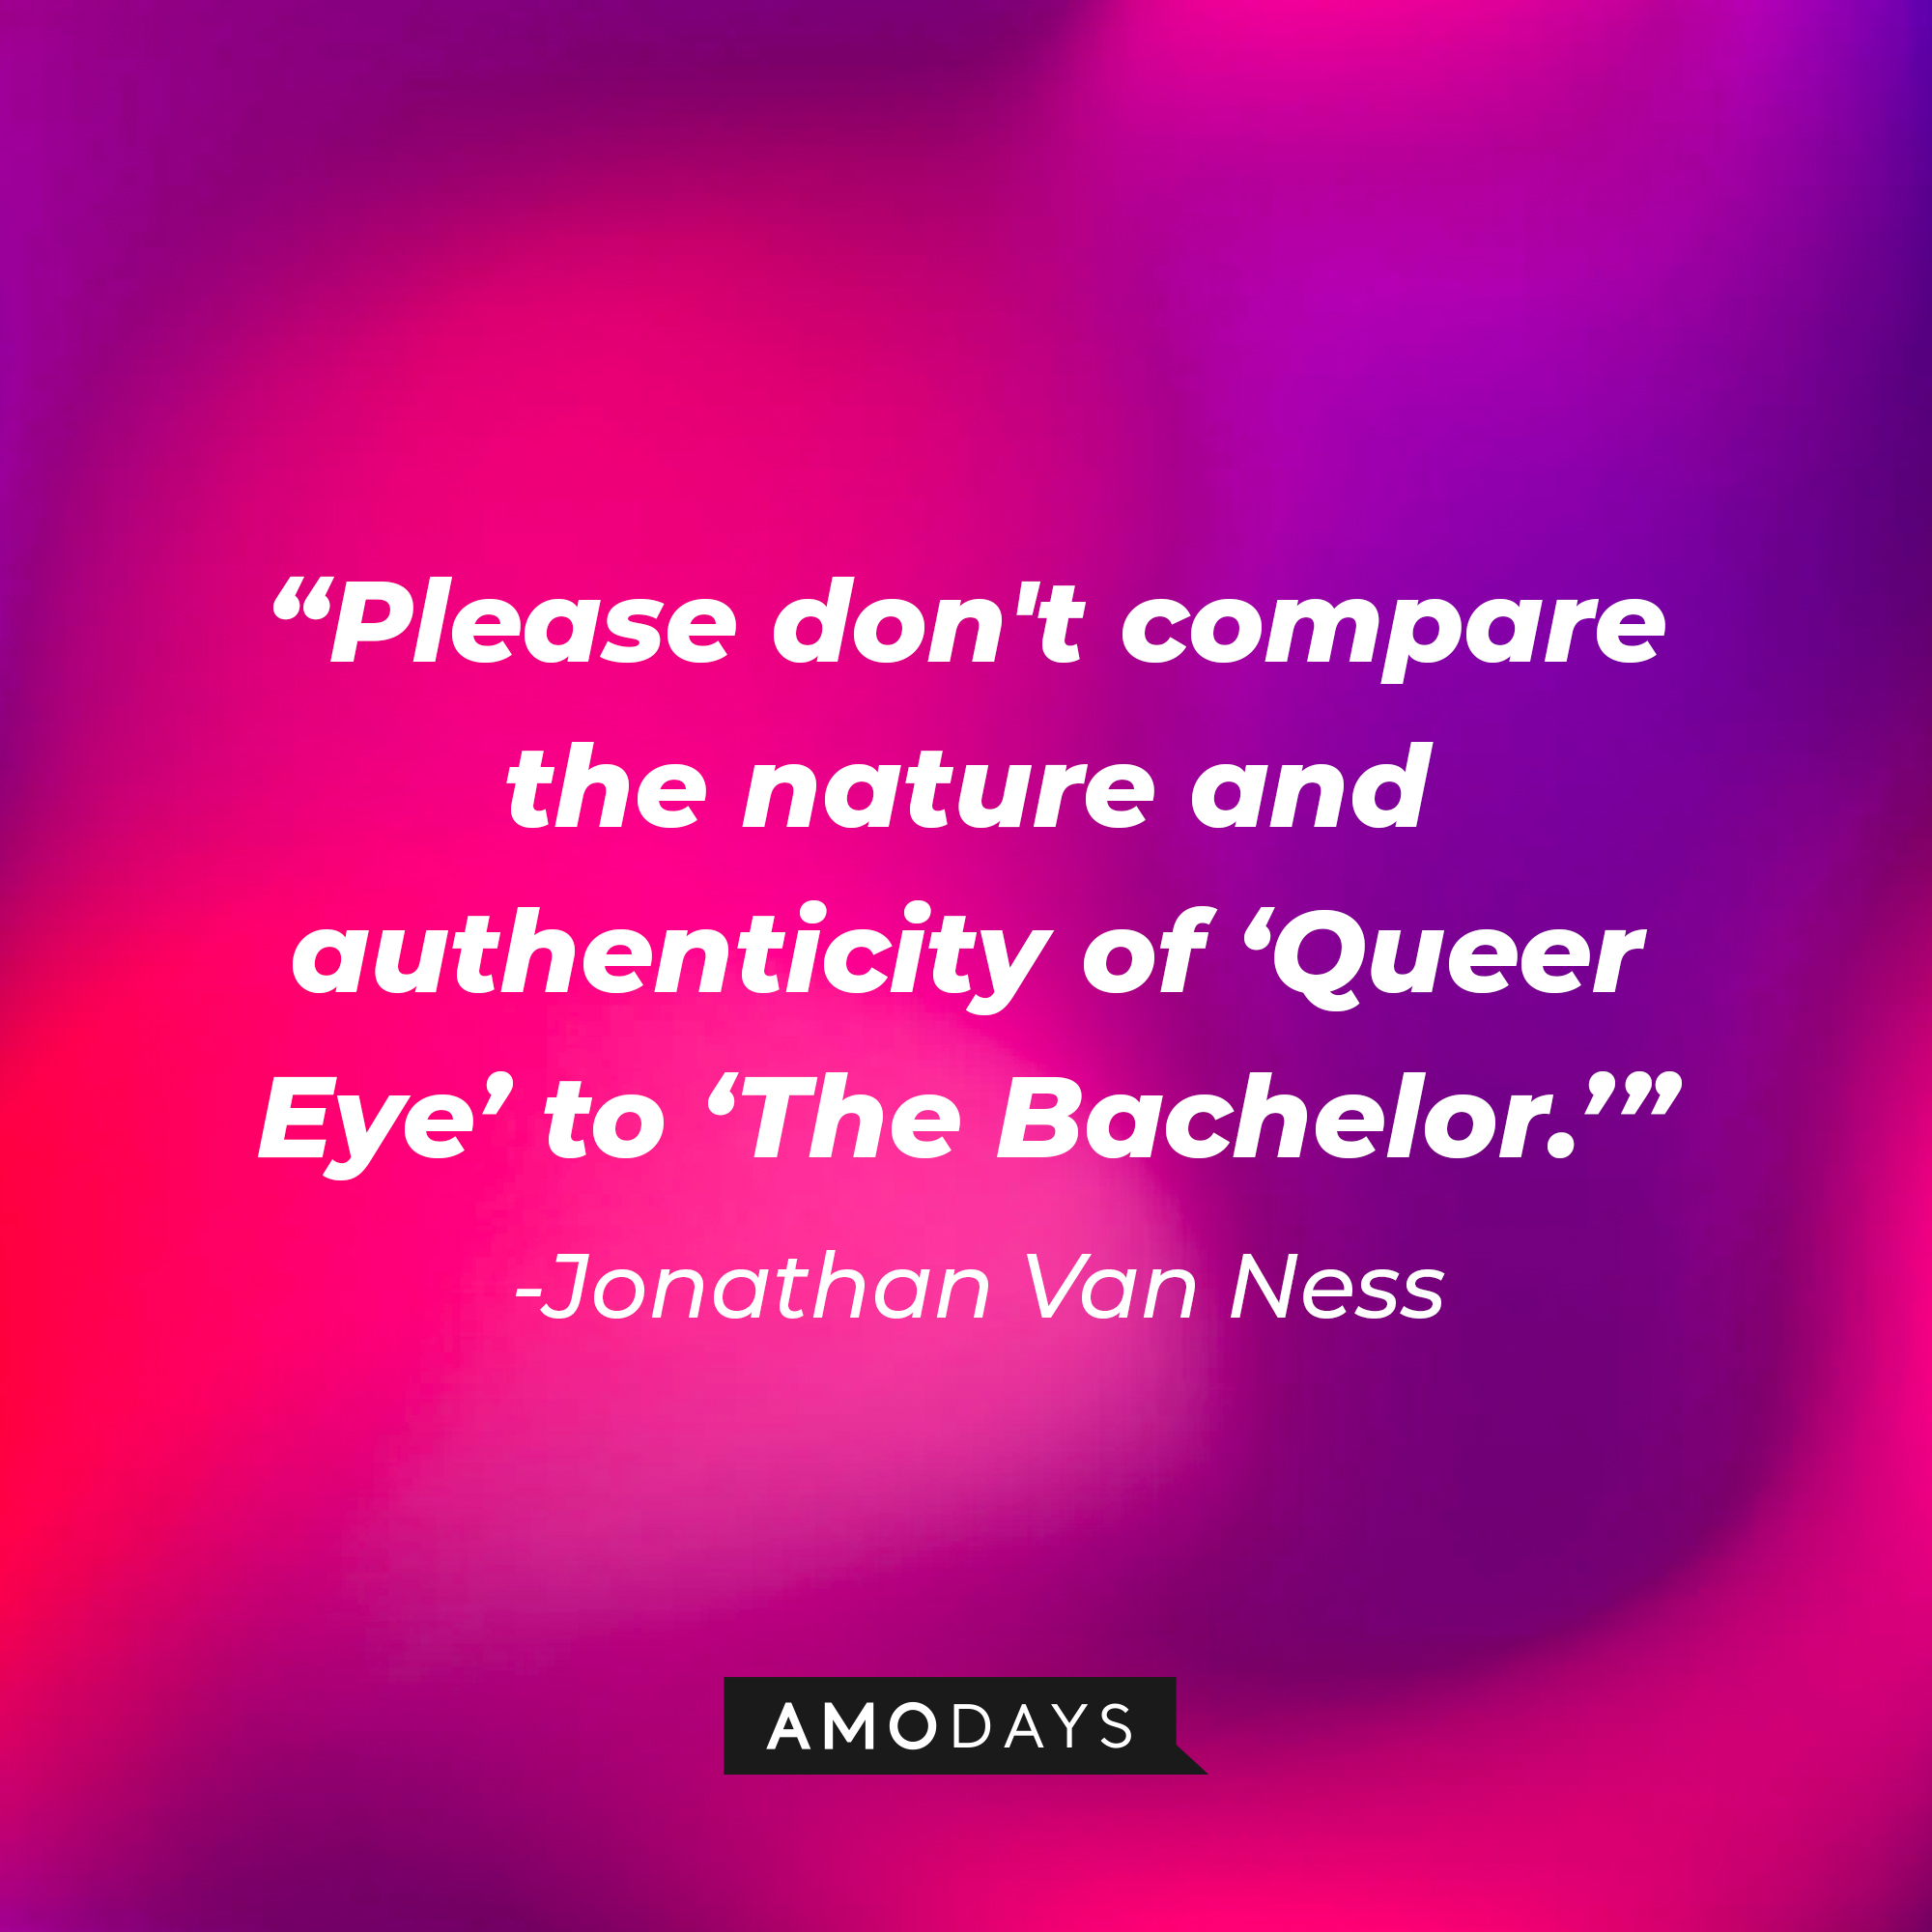 Jonathan Van Ness’ quote: "Please don't compare the nature and authenticity of 'Queer Eye' to 'The Bachelor.'" | Image: AmoDays